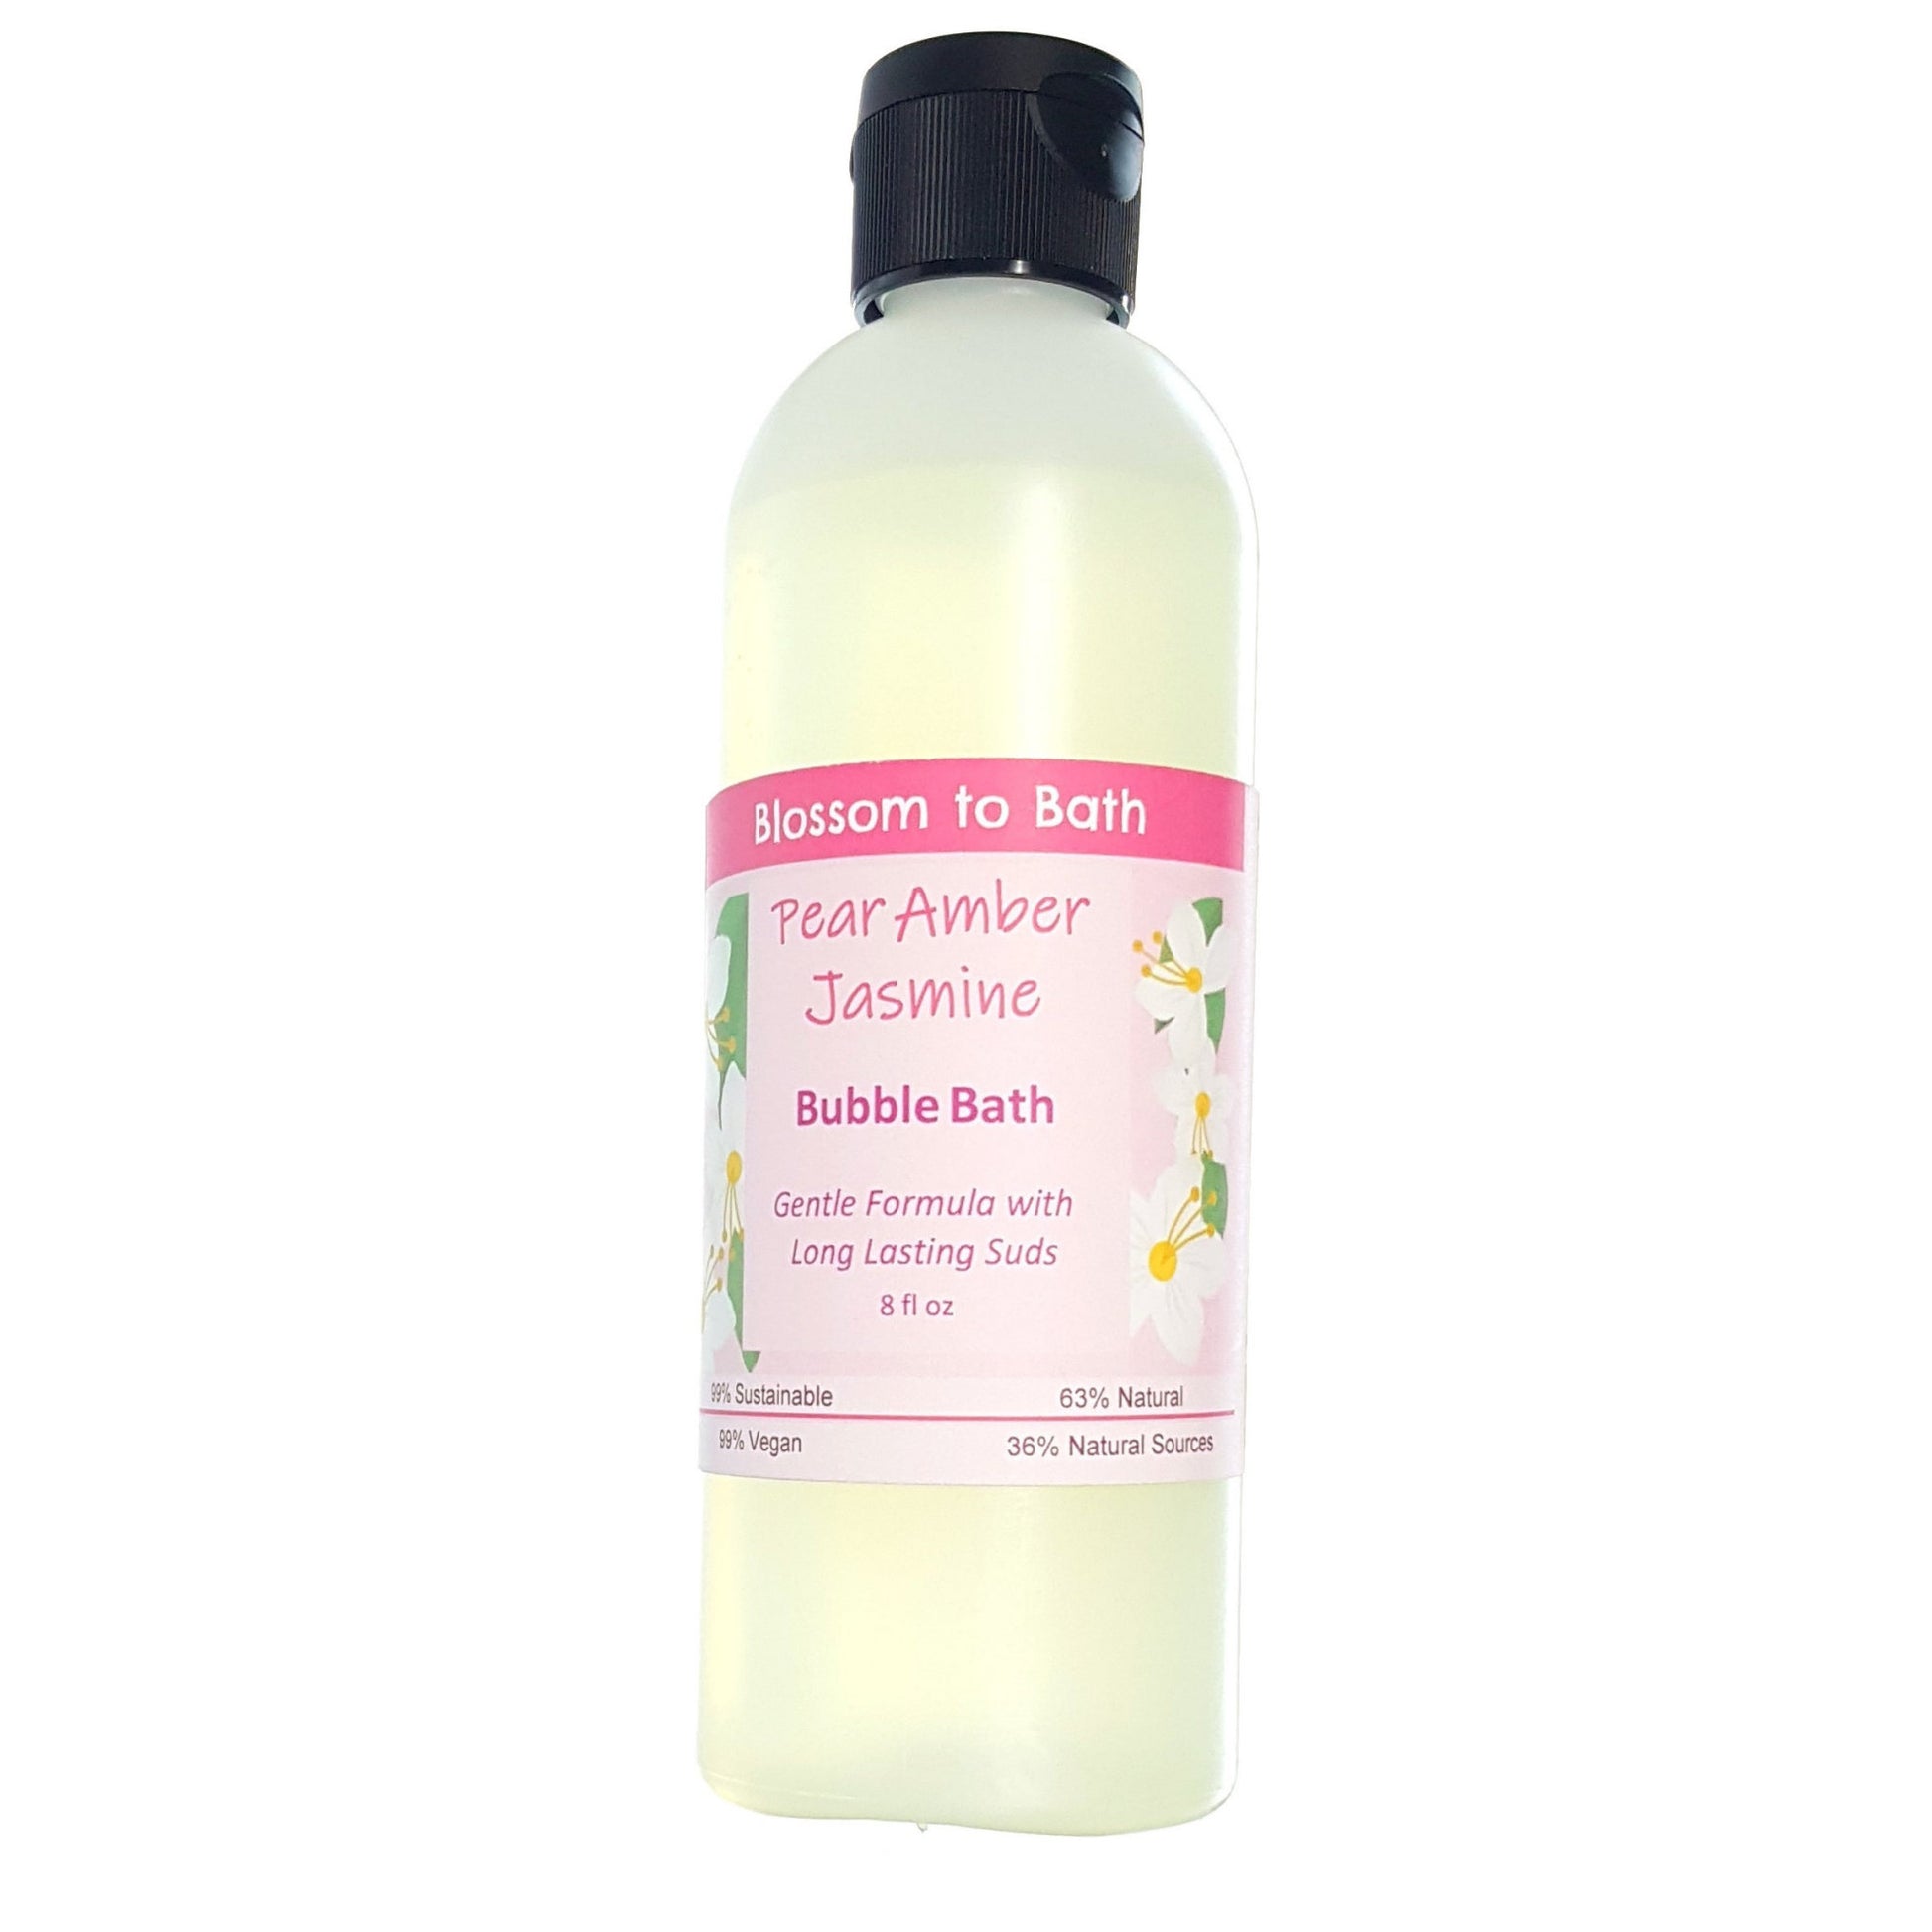 Buy Blossom to Bath Pear Amber Jasmine Bubble Bath from Flowersong Soap Studio.  Lively, long lasting  bubbles in a gentle plant based formula for maximum relaxation time  A scent that lets you escape to an island paradise of pear, jasmine, and warm spices.